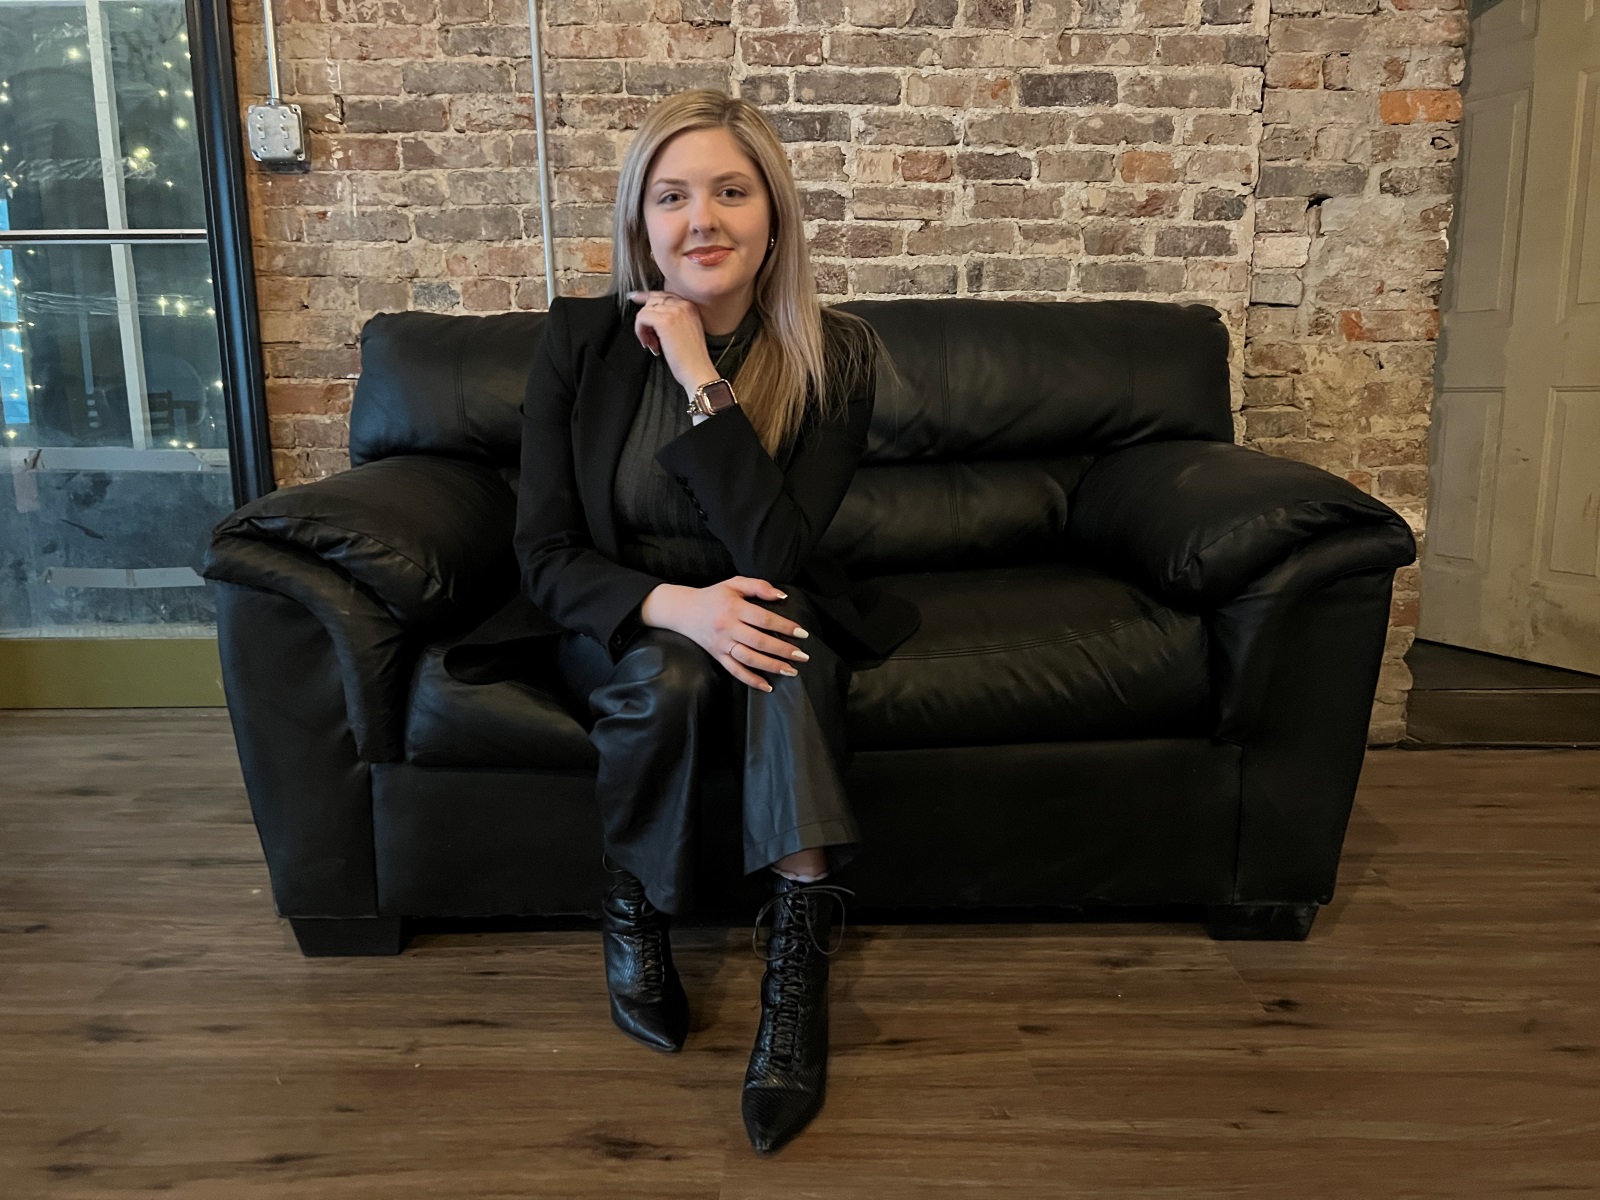 Grace Billingsley, wearing all black, sits on a black couch in front of a brick wall